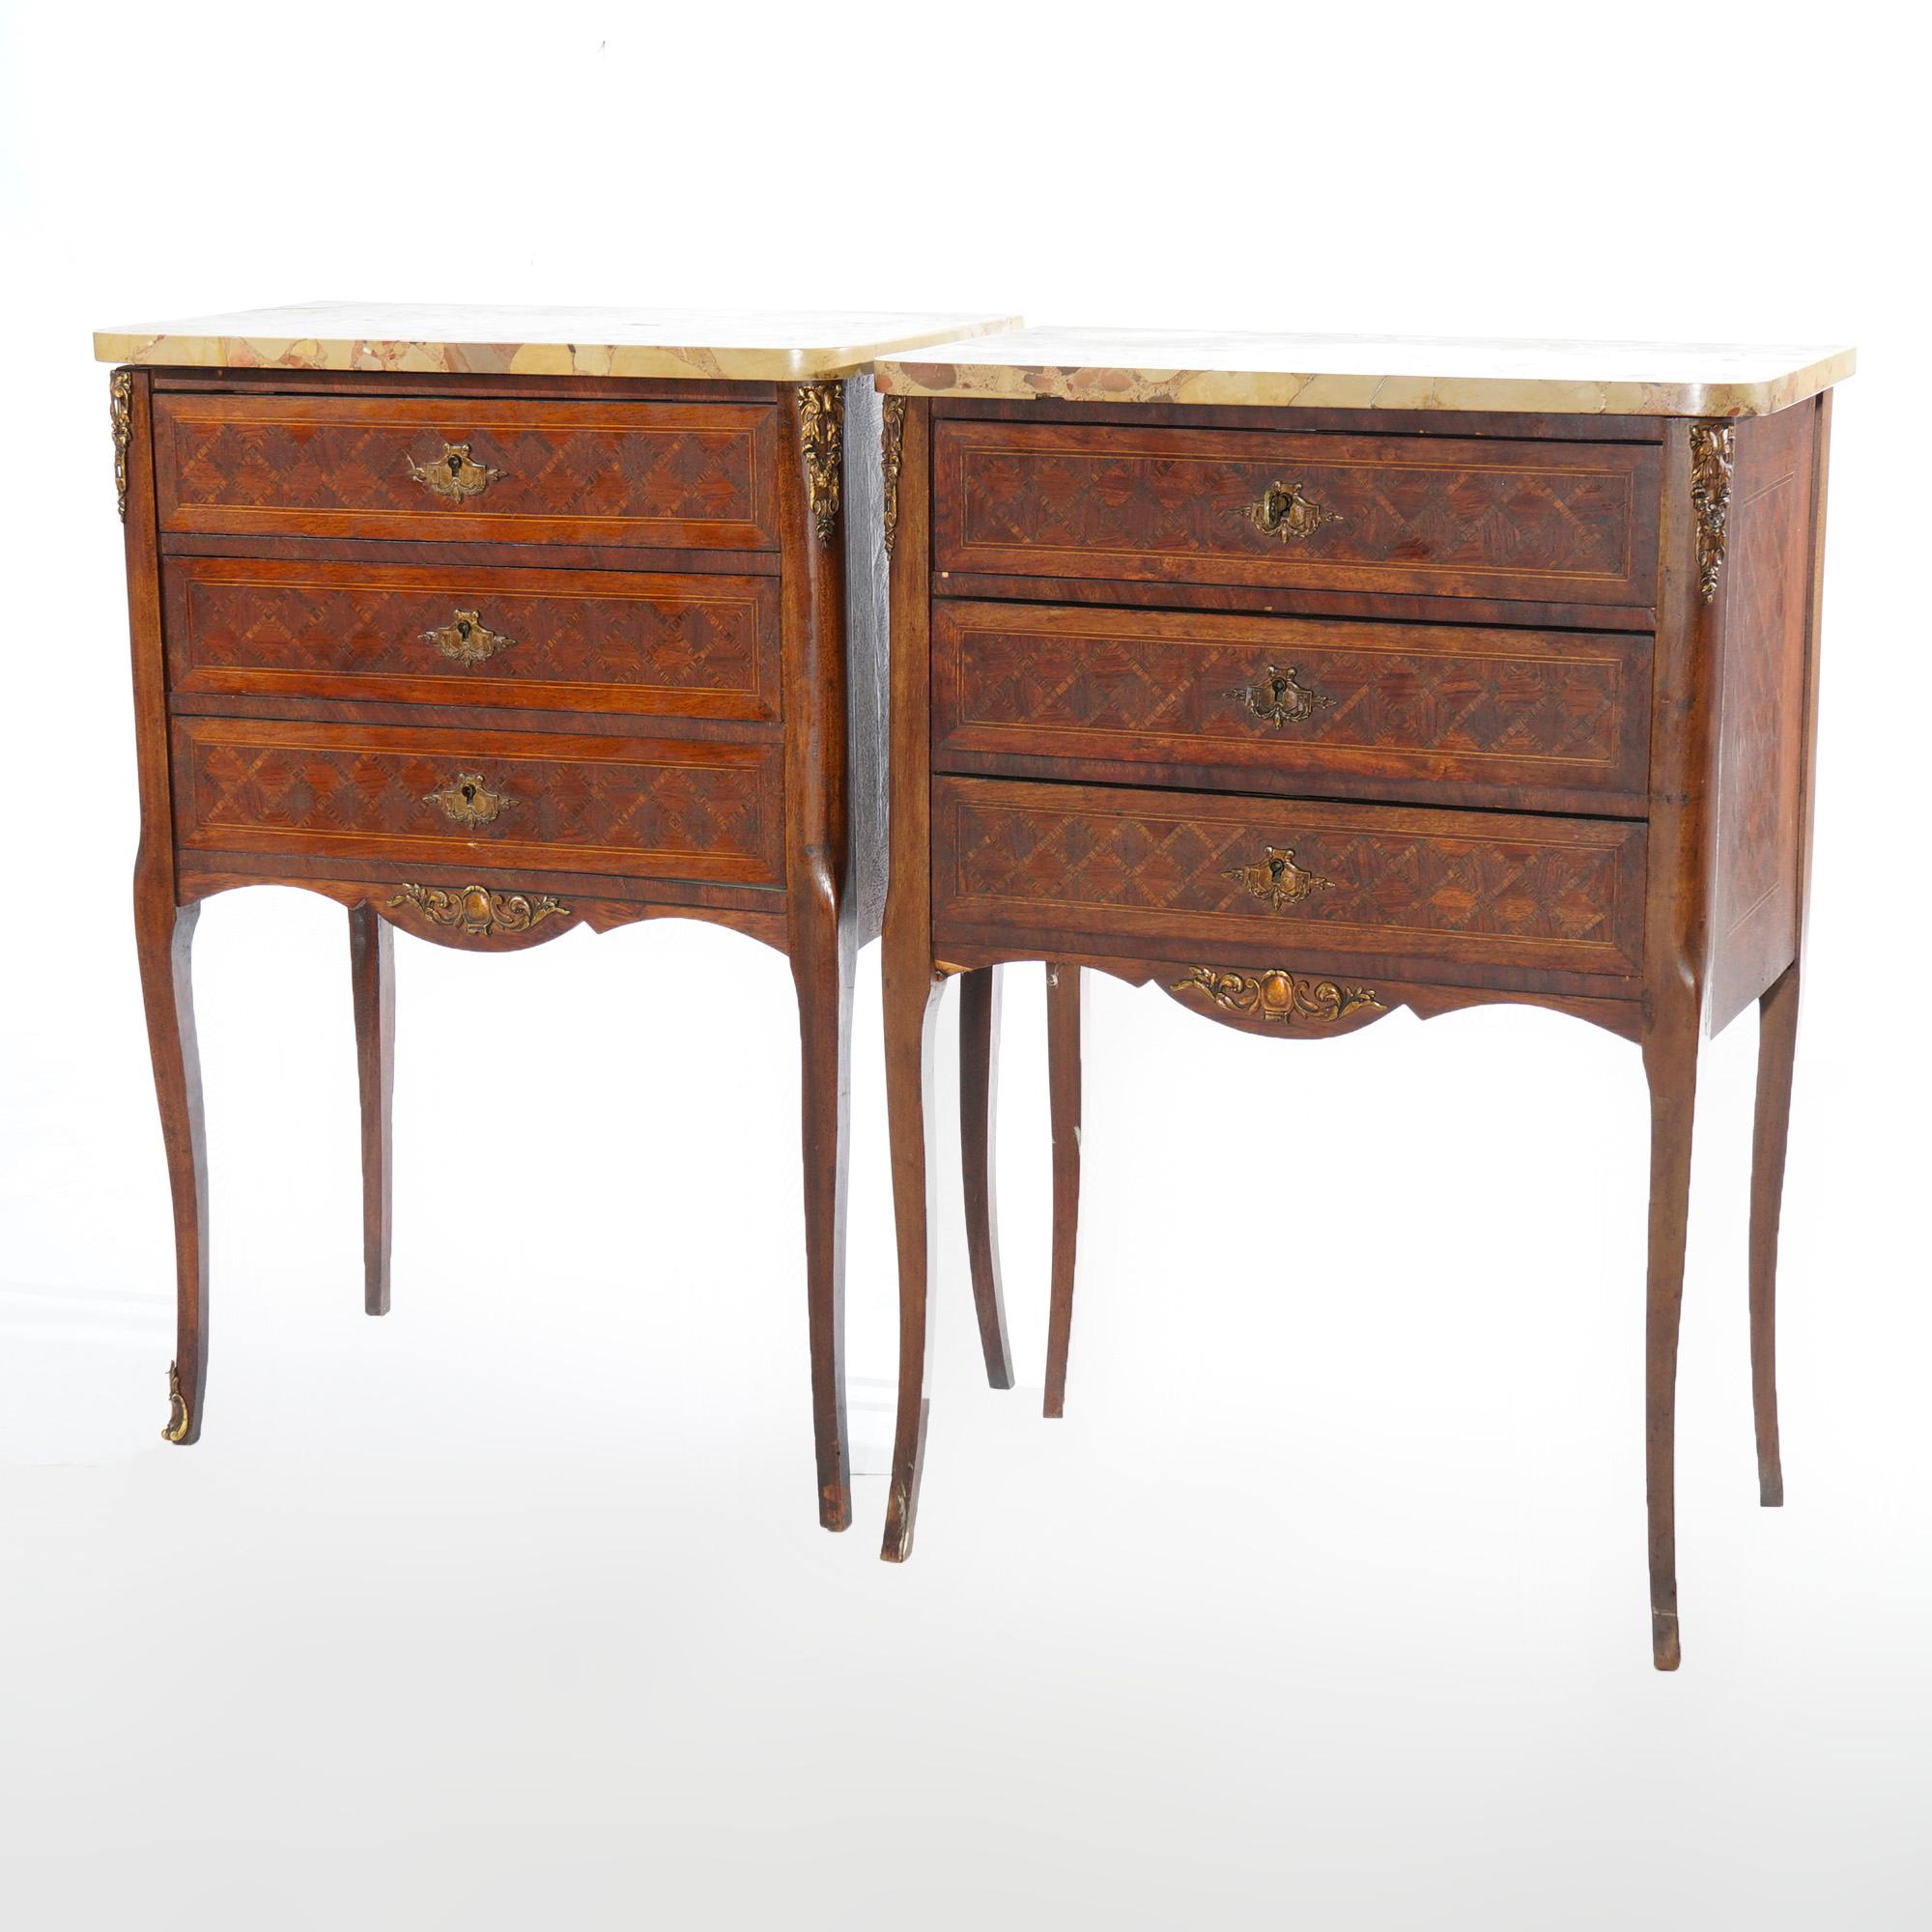 An antique pair of French side tables offer specimen marble tops surmounting kingwood cases having three satinwood crossbanded drawers, raised on cabriole legs, foliate cast ormolu mounts throughout, c1910

Measures- 30.5